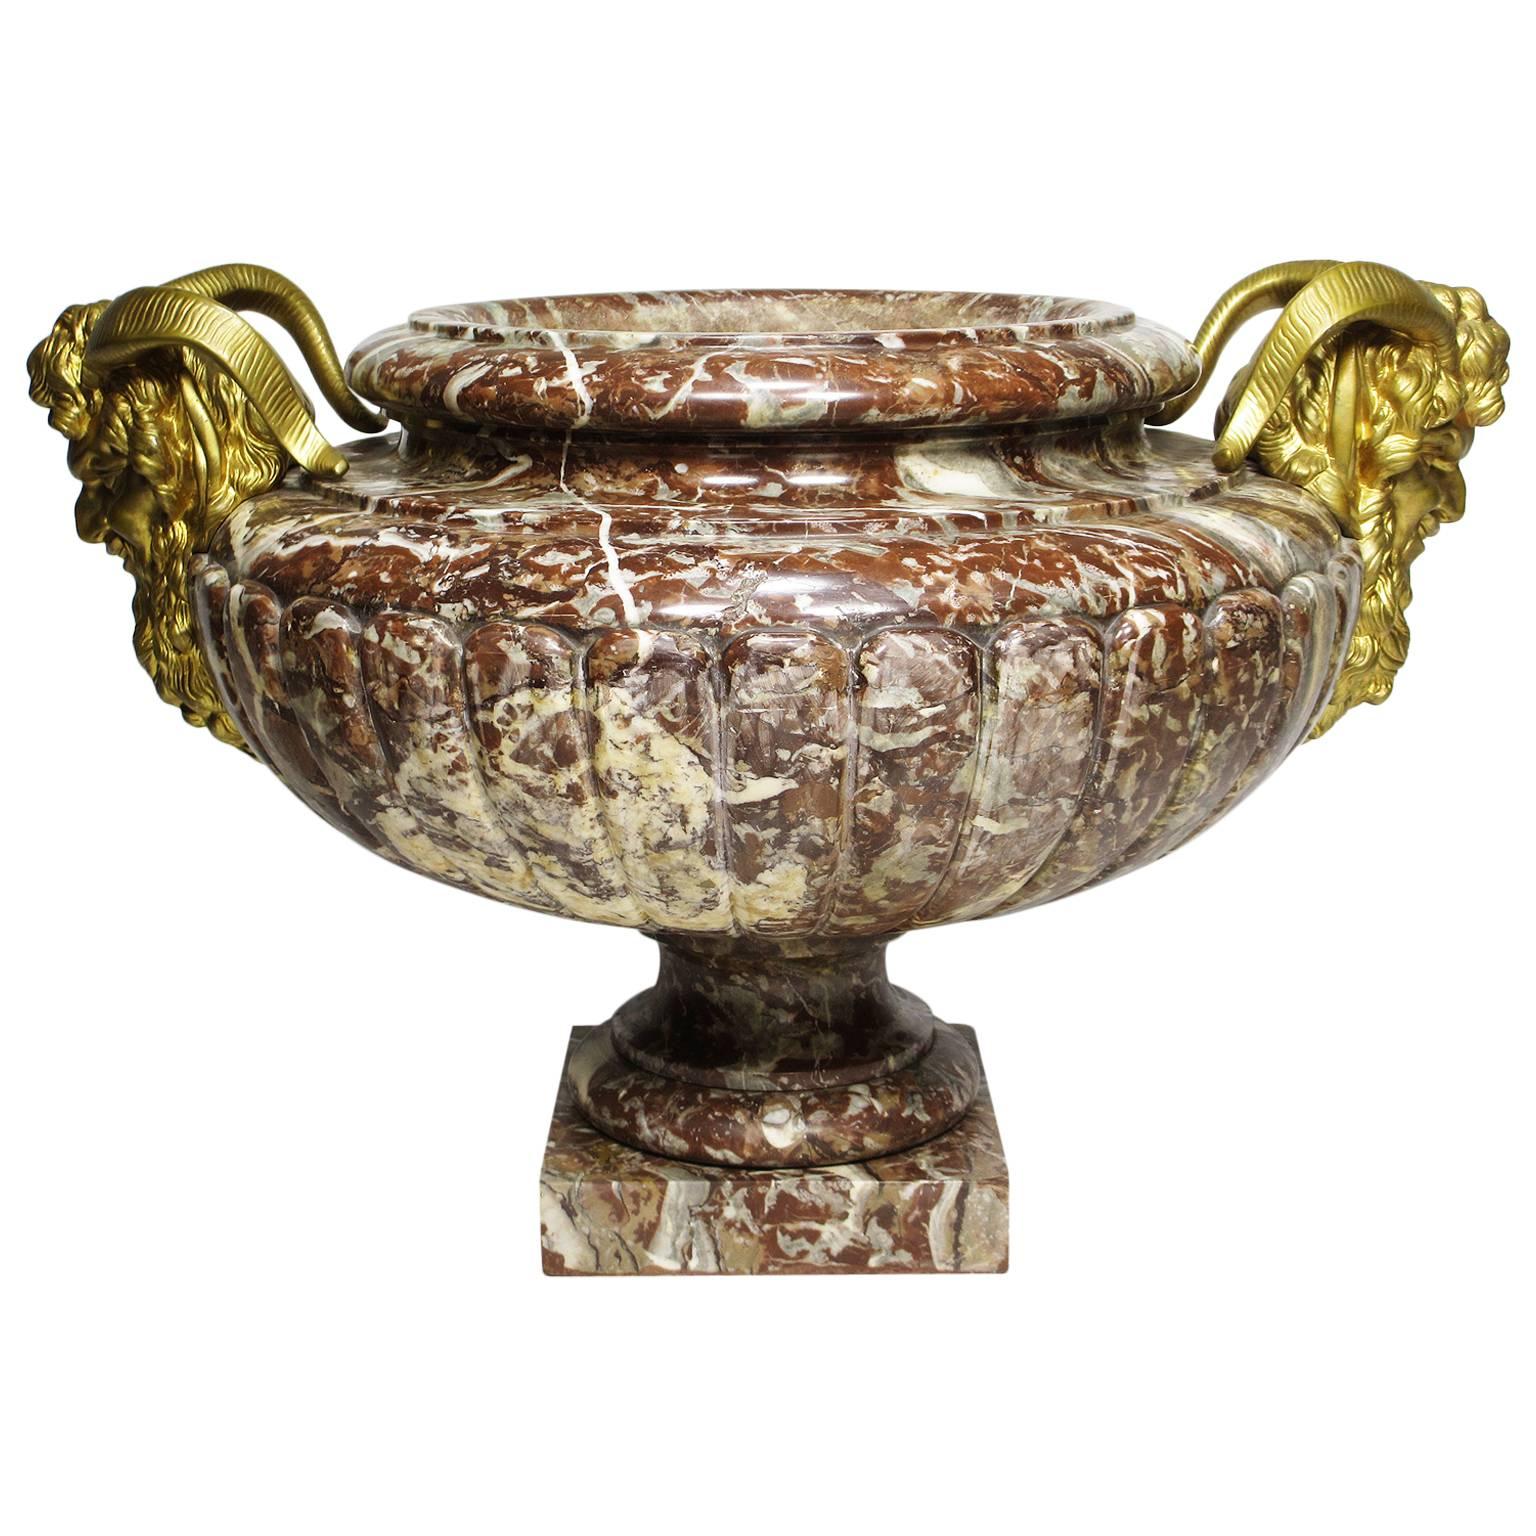 French 19th Century Louis XV Style Marble and Gilt Bronze-Mounted Planter-Urn